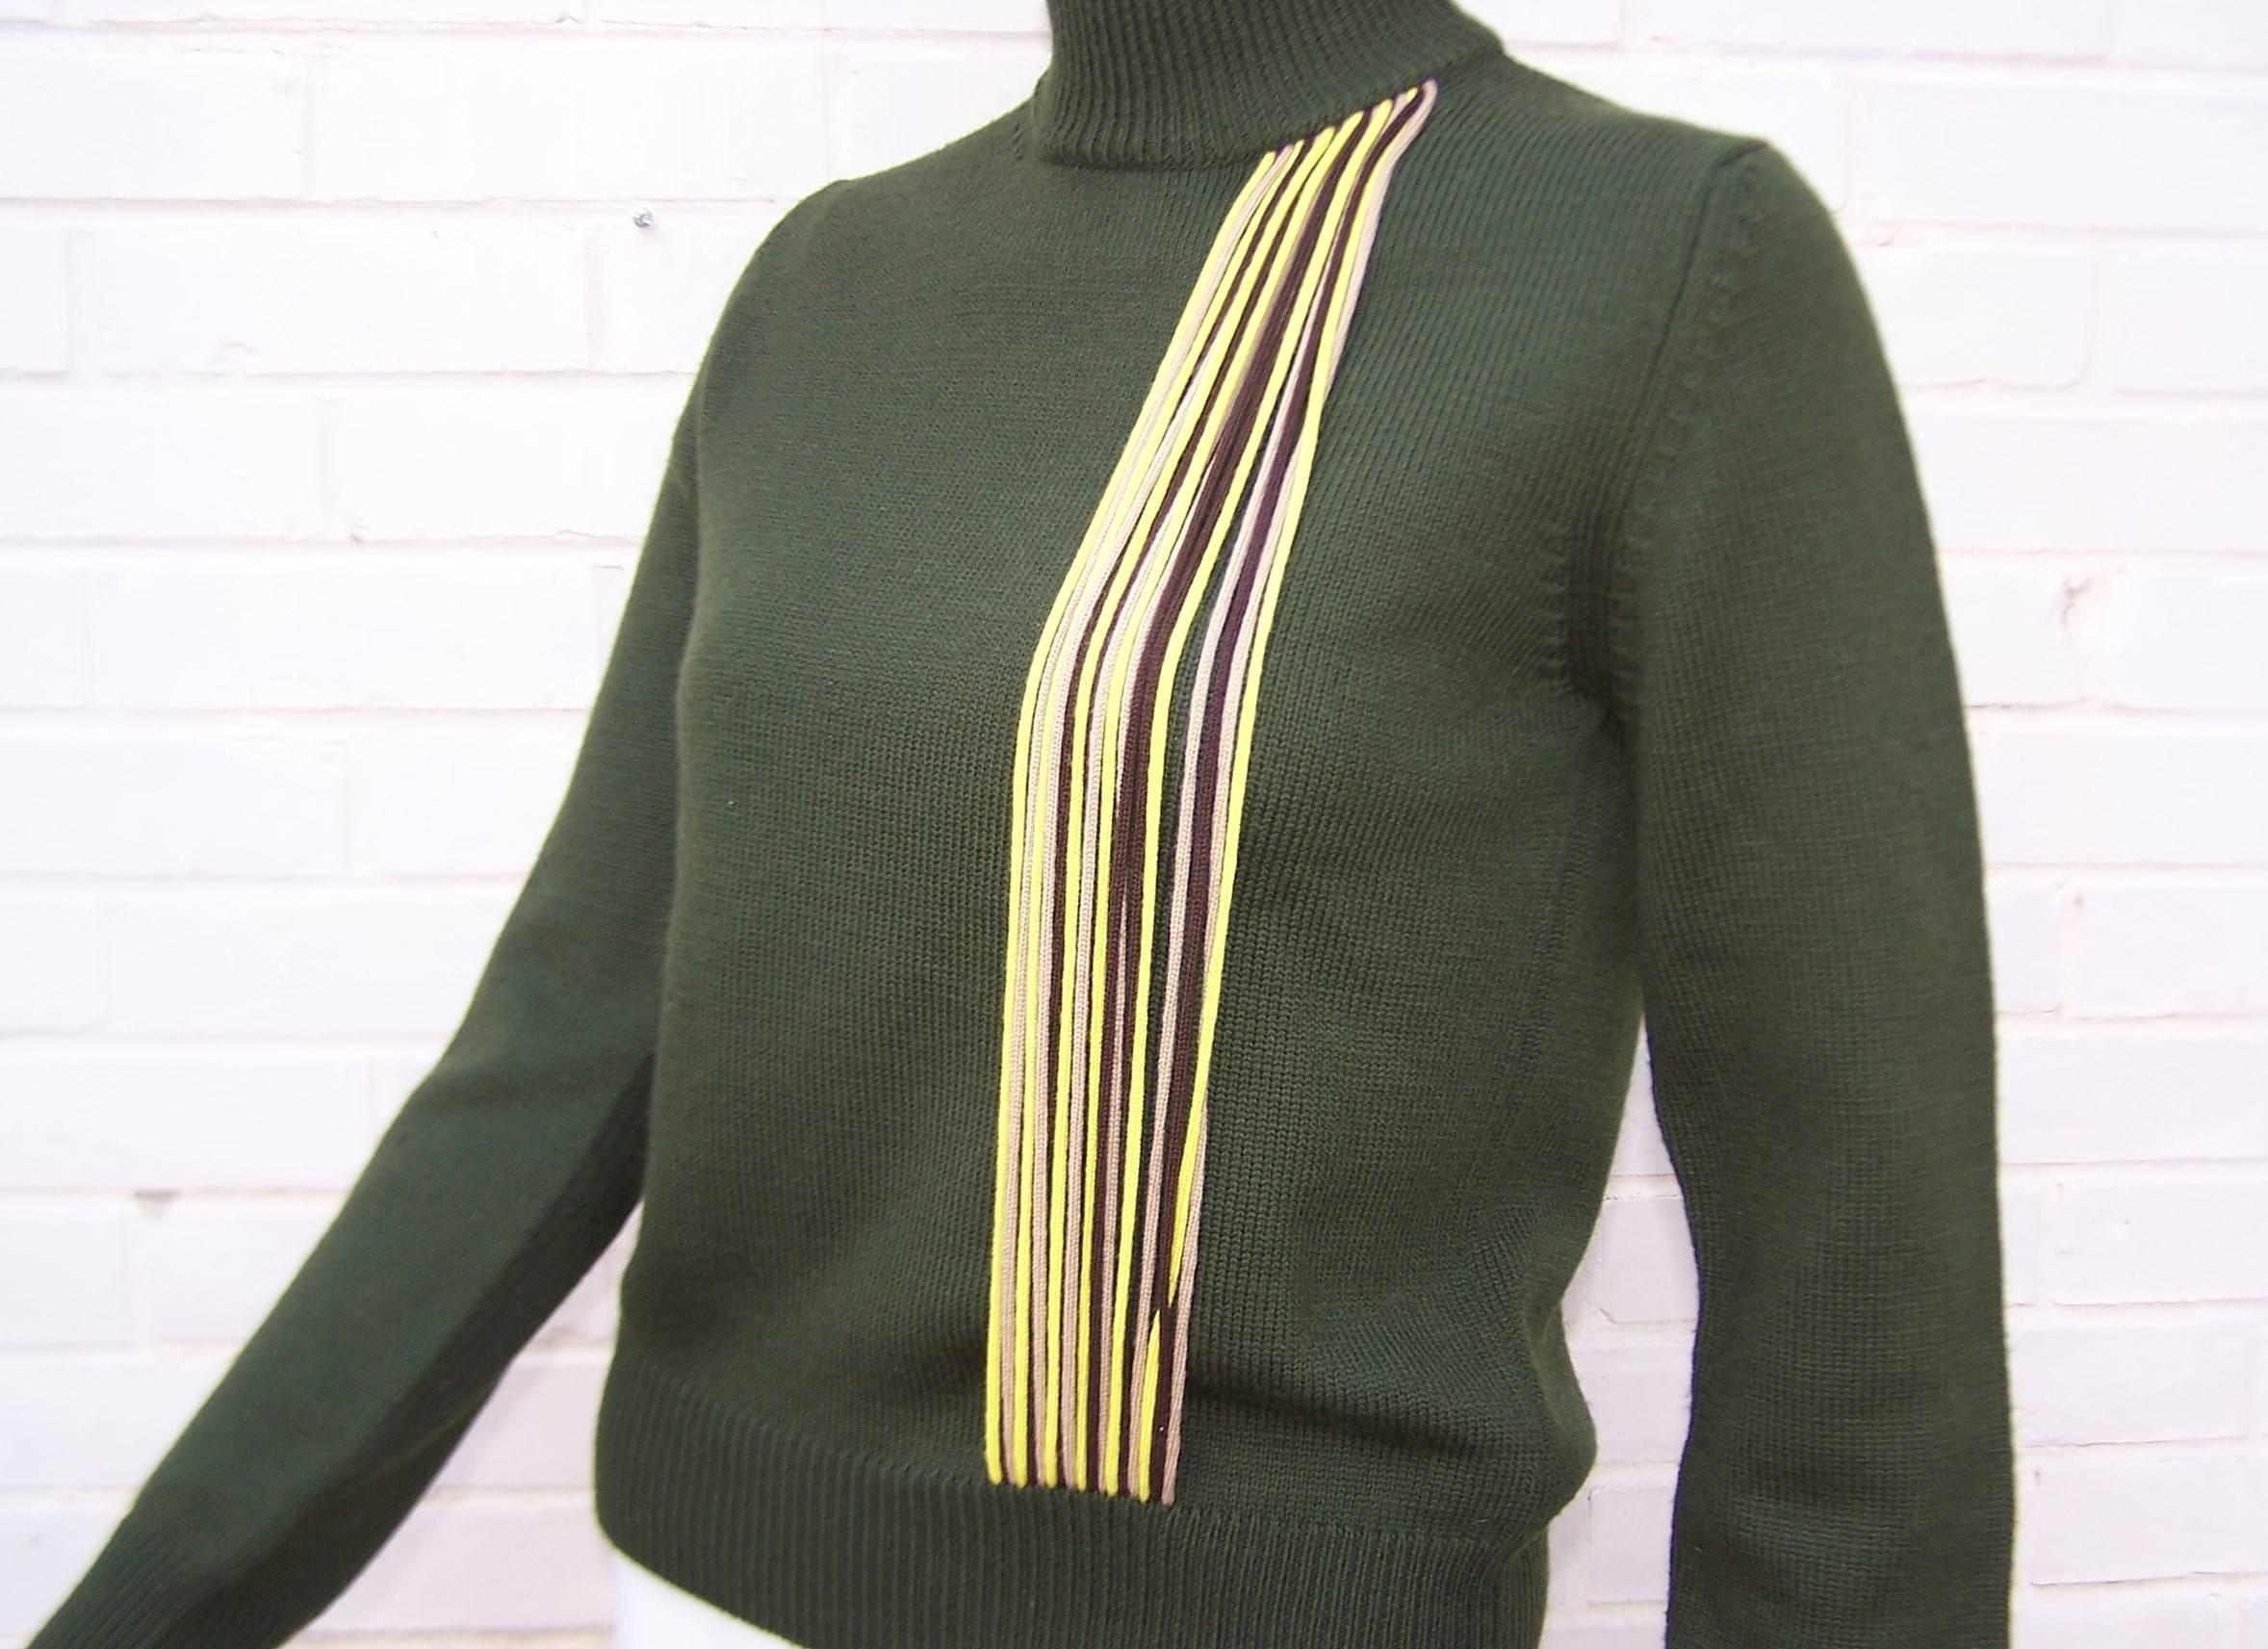 C.1990 Byblos Army Green Turtleneck Sweater With Op Art Yarn Details 3